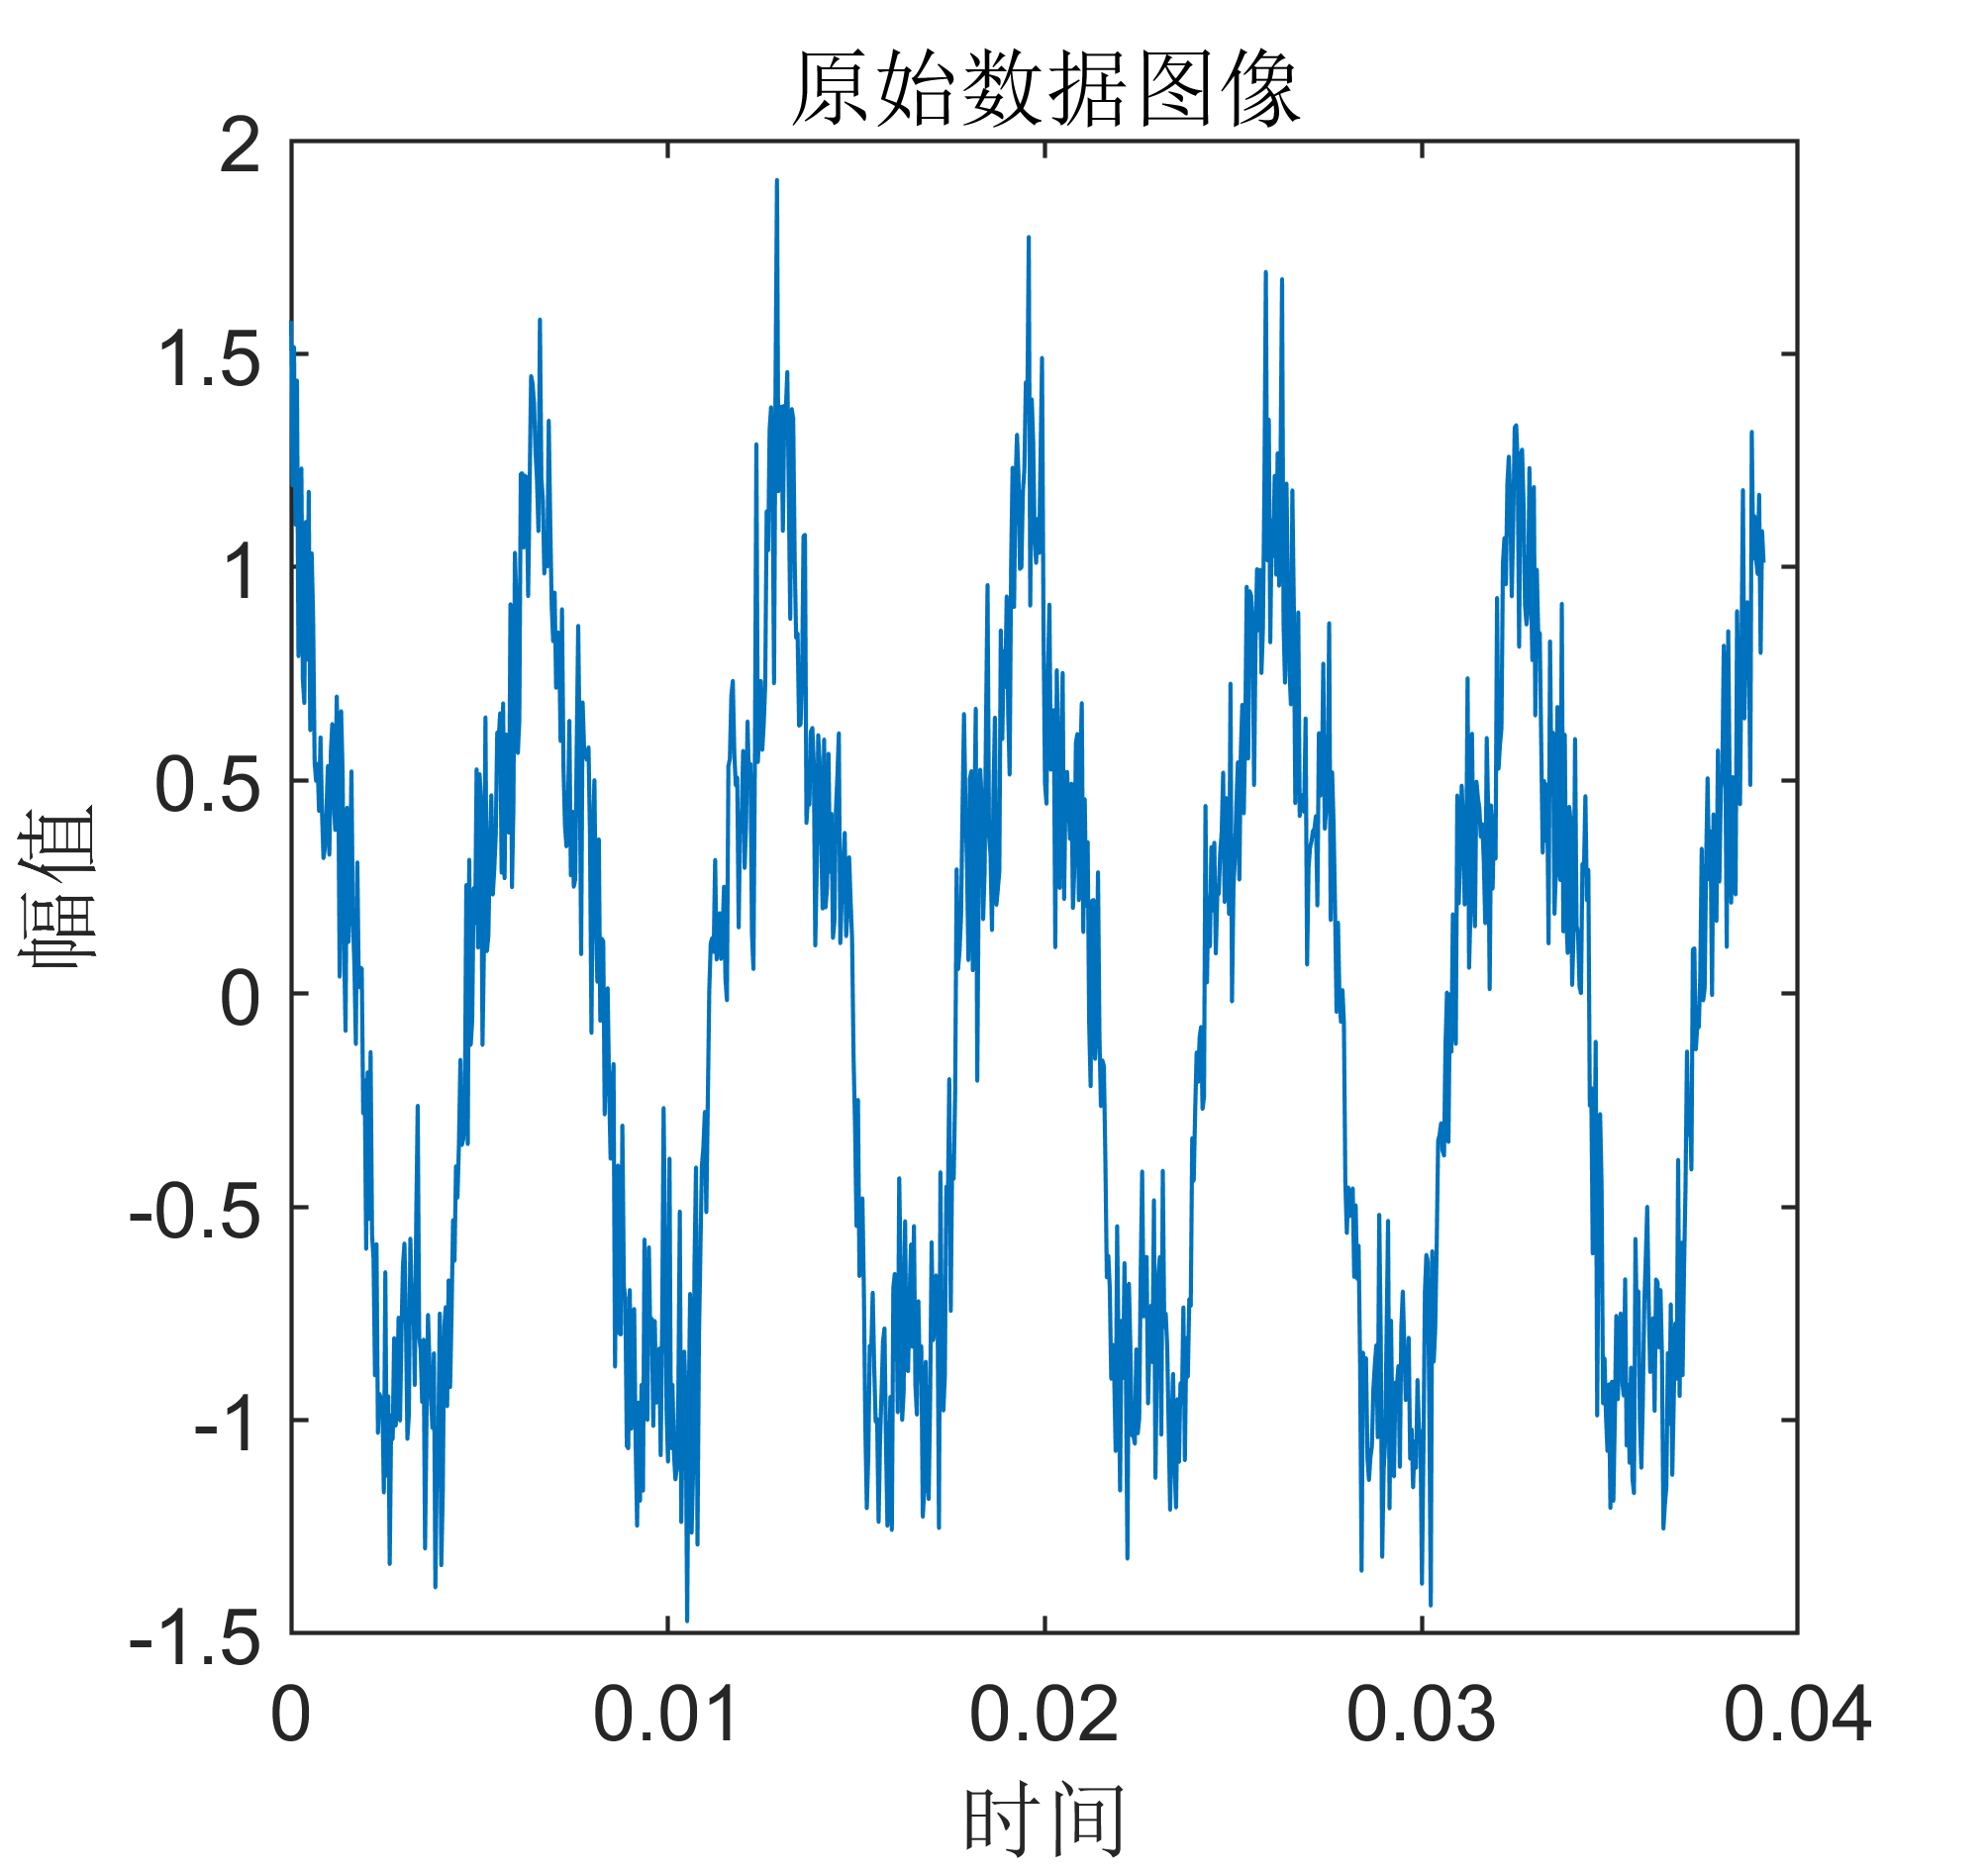 【<span style='color:red;'>MATLAB</span>】tvfEMD信号<span style='color:red;'>分解</span>+FFT+HHT<span style='color:red;'>组</span><span style='color:red;'>合算</span><span style='color:red;'>法</span>